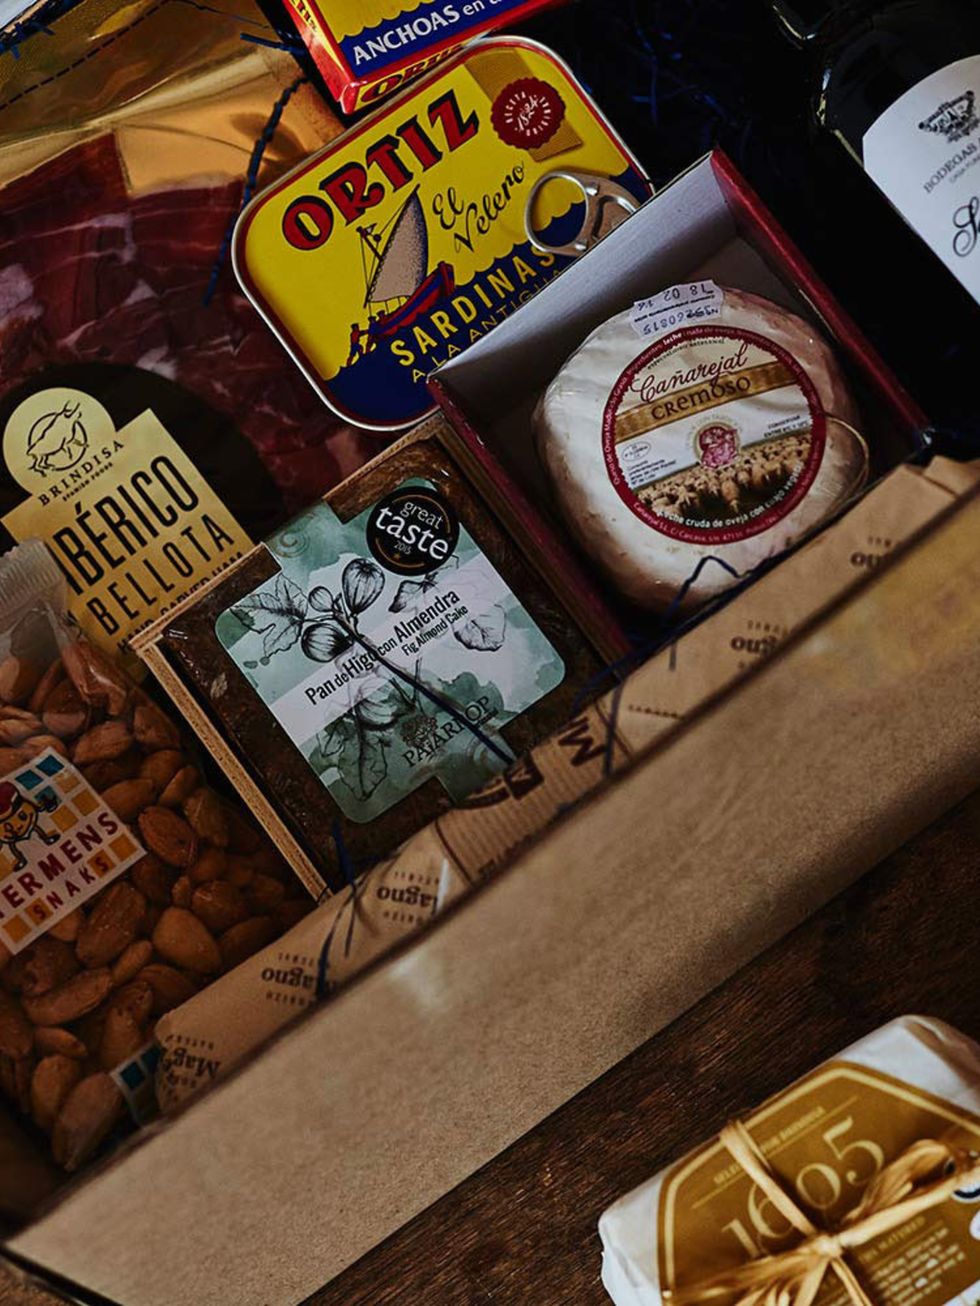 <p><strong><a href="http://brindisa.com" target="_blank">Brindisa</a> - Artisan Selection Box, £55</strong></p>

<p>Brindisa has taken its best-selling food and packed it into this delightful artisan box. Full to the brim of hand-carved Iberico belloa jam